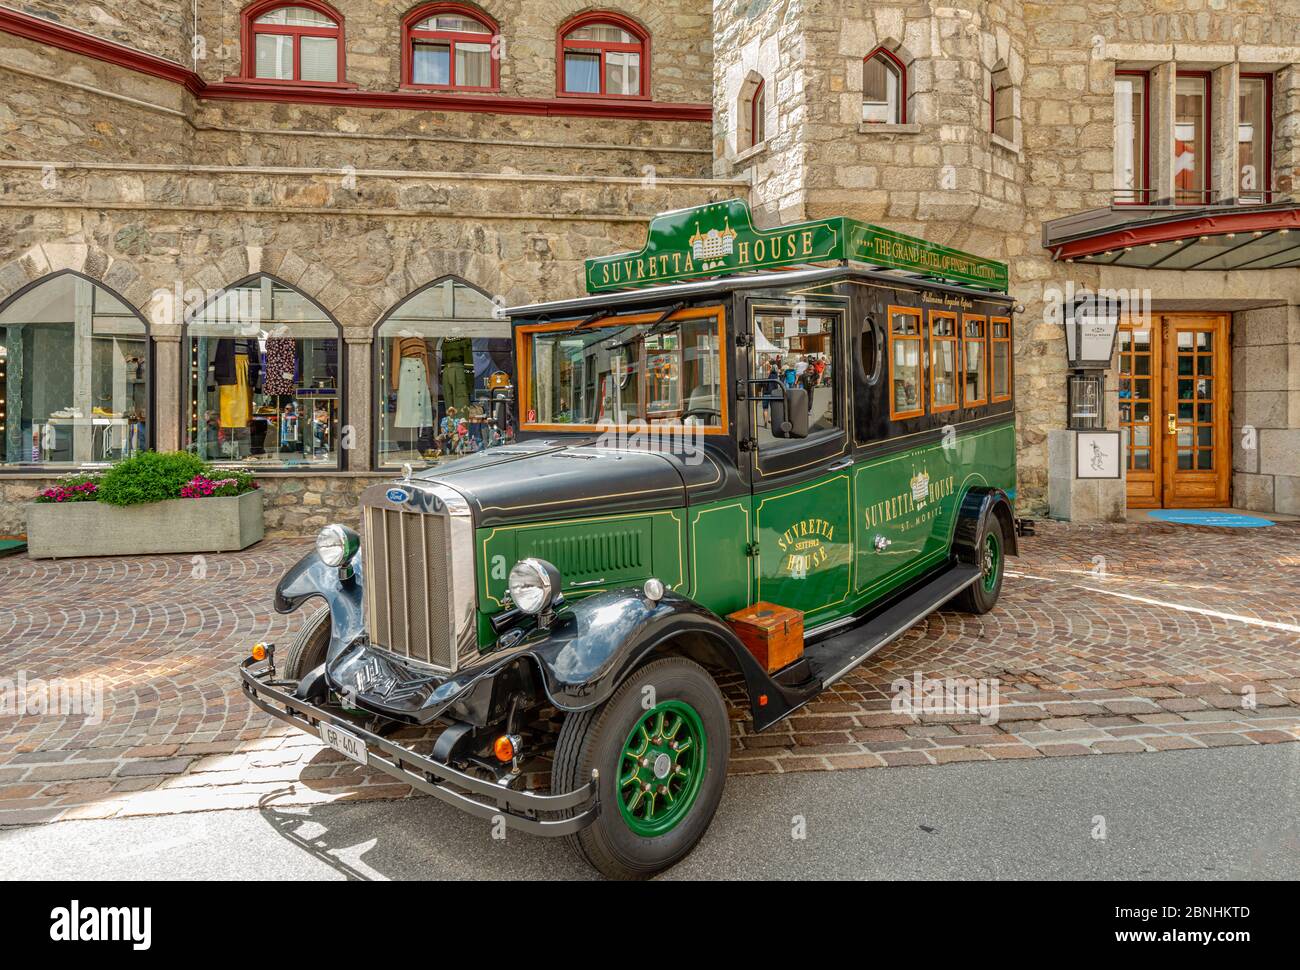 Suvretta House Hotel Ford Vintage bus in front of the Badrutts Palace Hotel, St.Moritz, Grisons, Switzerland Stock Photo